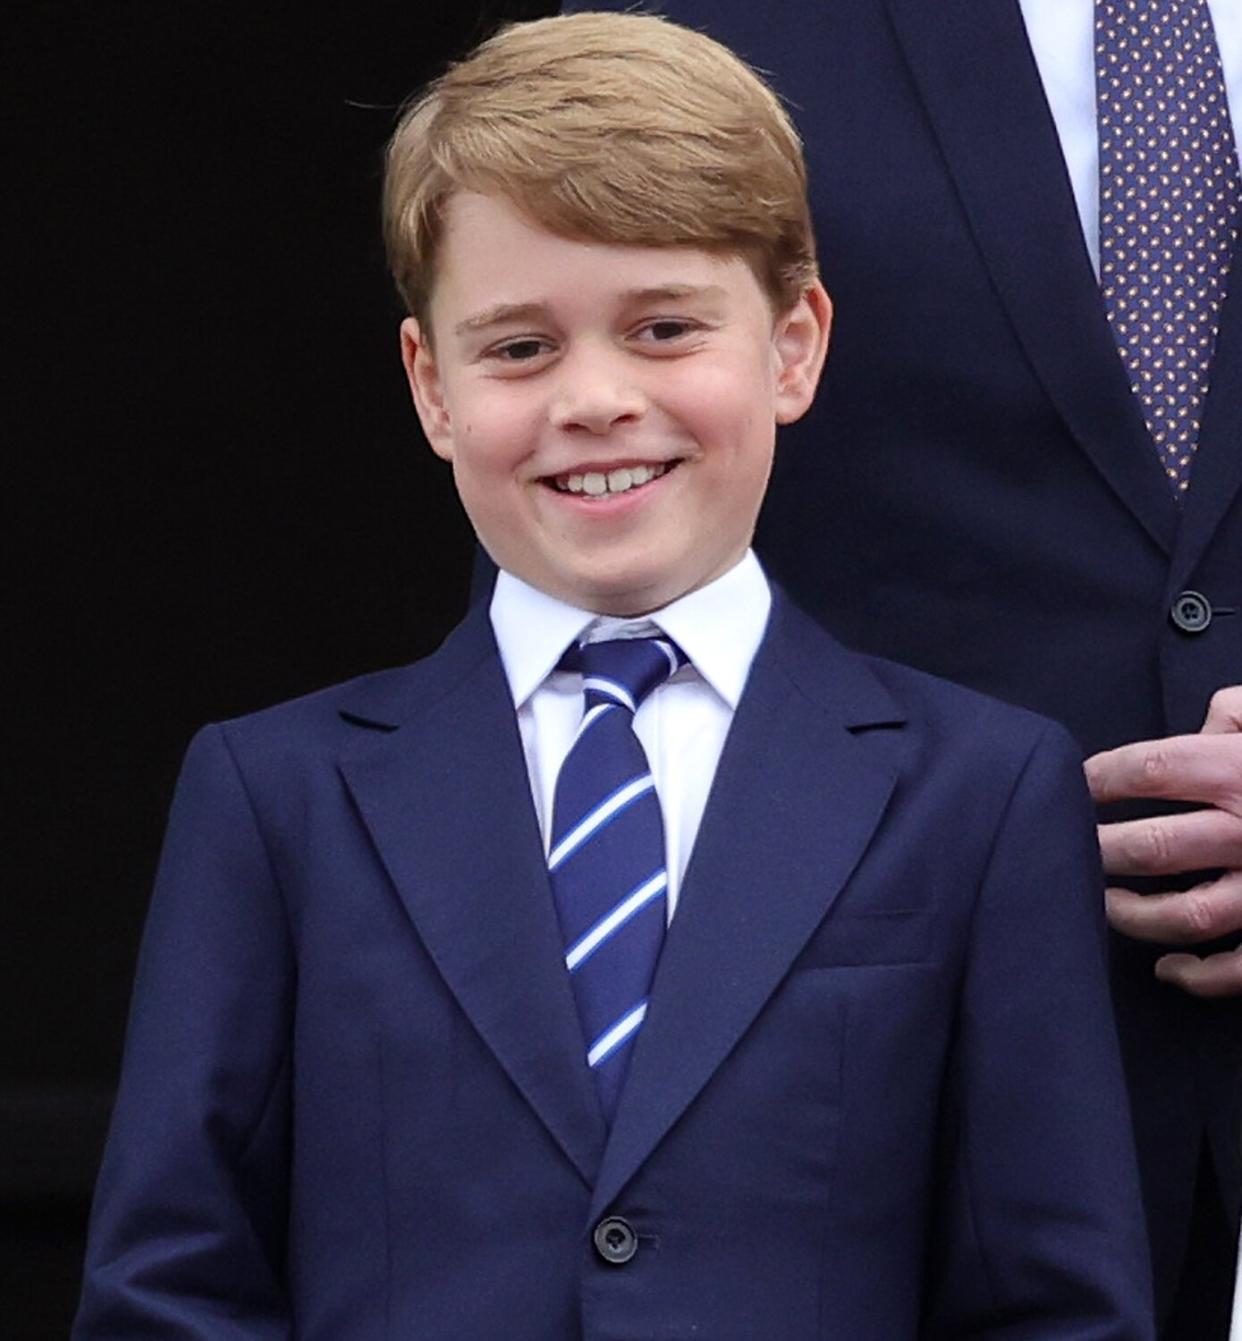 Prince George of Cambridge on the balcony of Buckingham Palace during the Platinum Jubilee Pageant on June 05, 2022 in London, England. The Platinum Jubilee of Elizabeth II is being celebrated from June 2 to June 5, 2022, in the UK and Commonwealth to mark the 70th anniversary of the accession of Queen Elizabeth II on 6 February 1952.